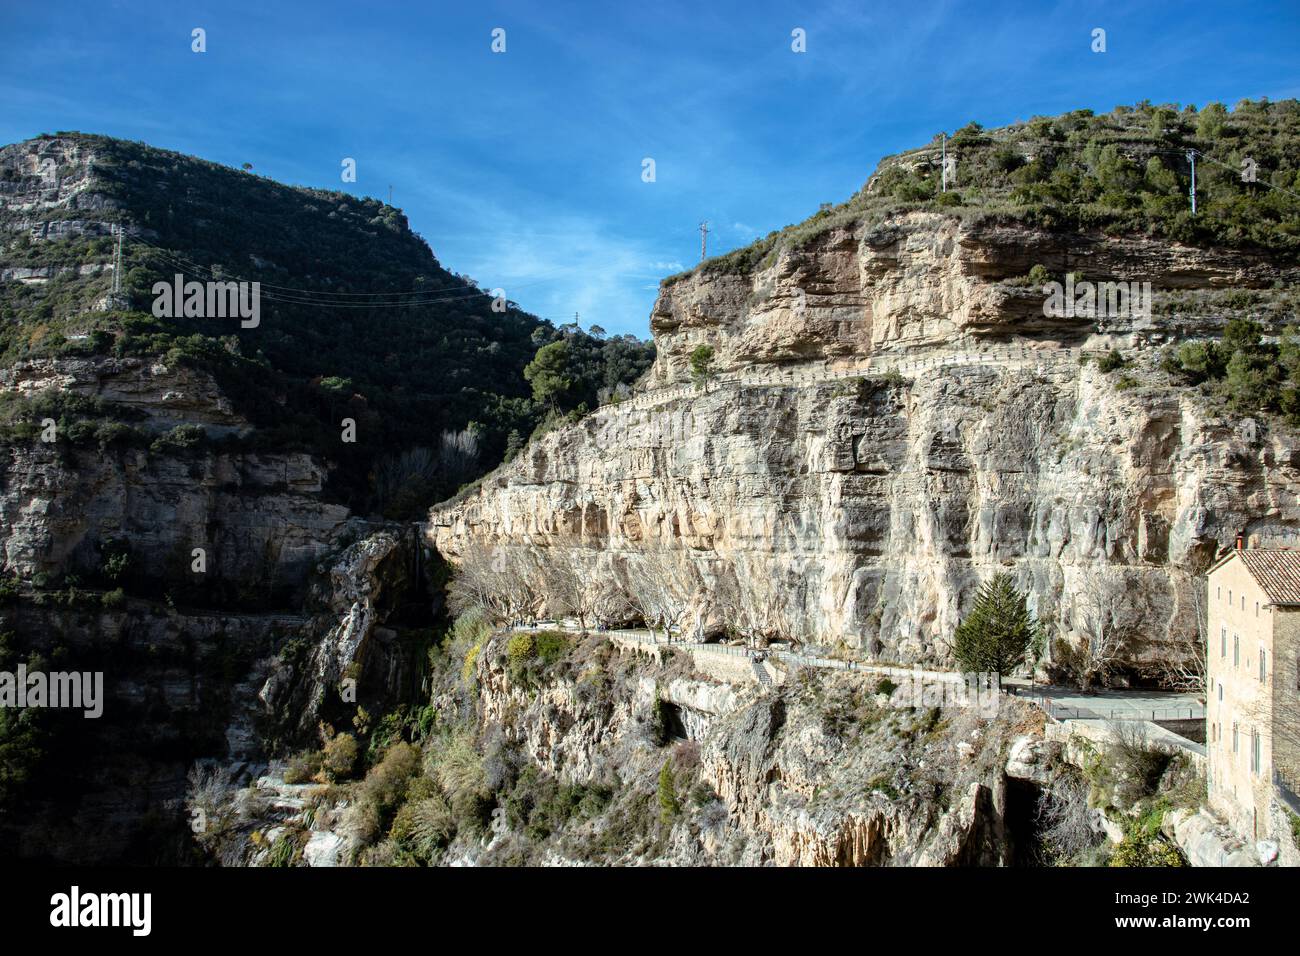 Sant Miquel del Fai is an 11th-century Benedictine monastery. Cliffs building formation, Catalonia. Beutiful mountain view of hills moody color graded Stock Photo